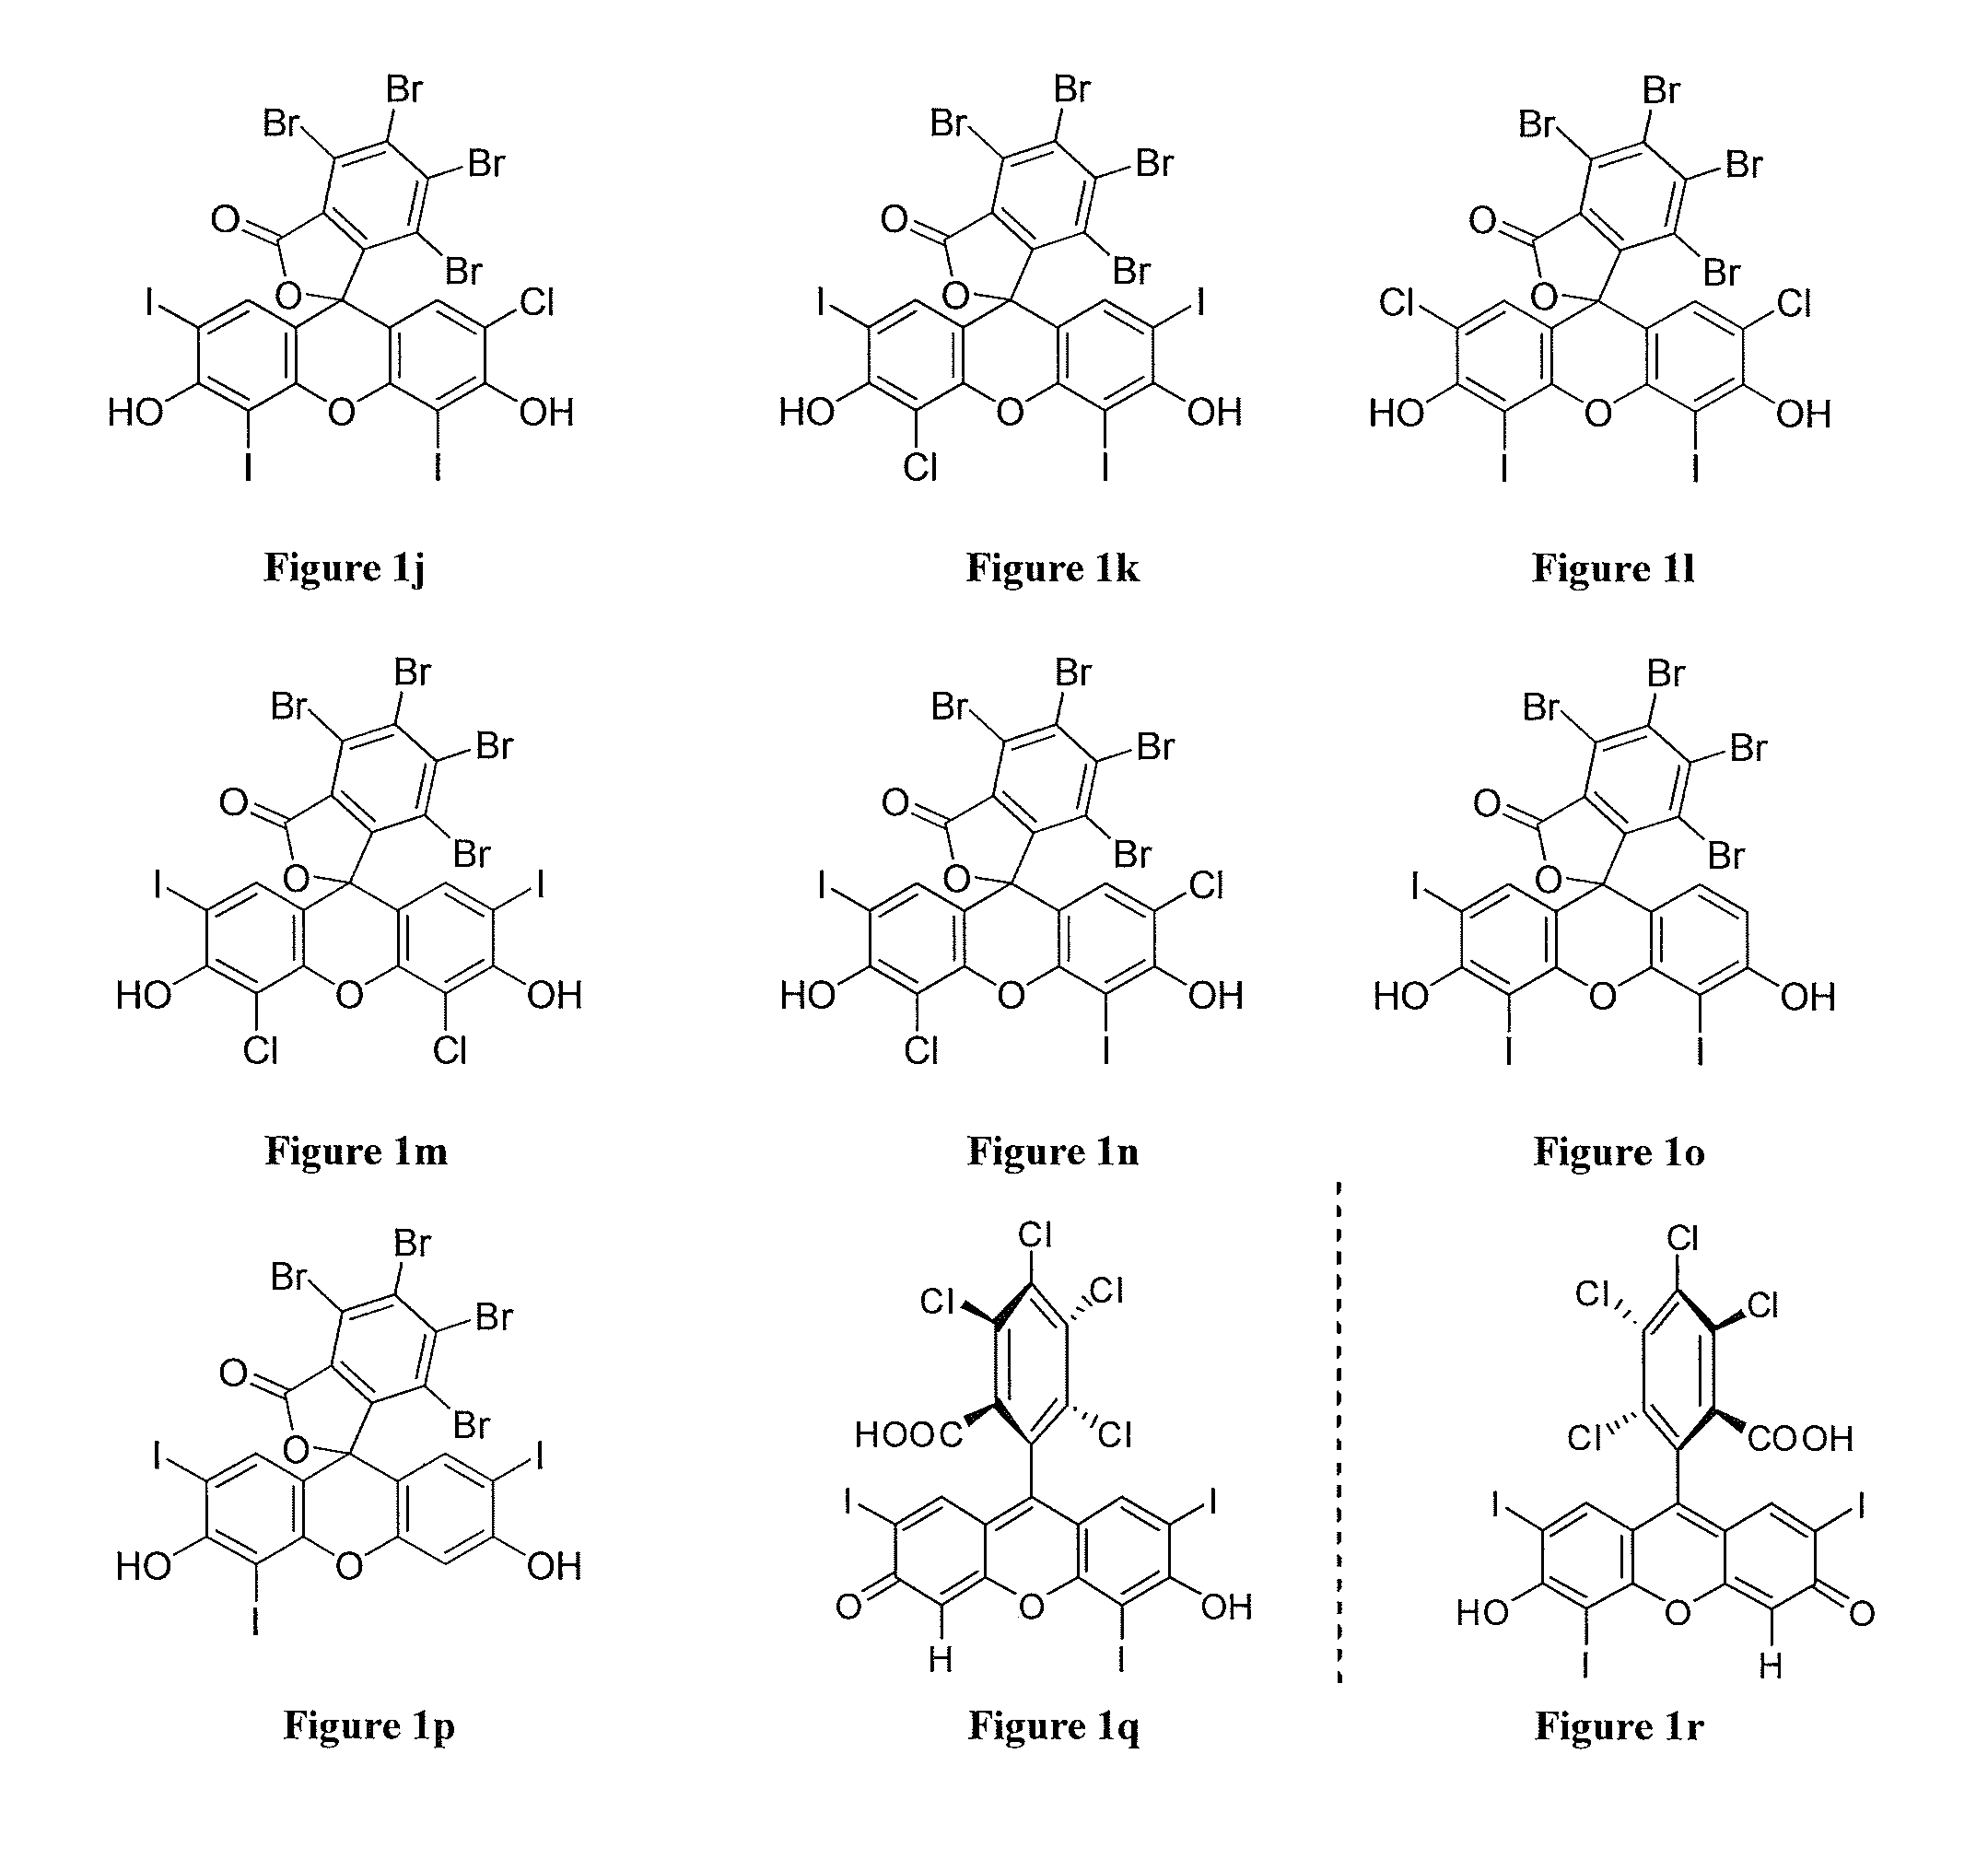 Process for the synthesis of 4,5,6,7-tetrachloro-3′,6′-dihydroxy-2′, 4′, 5′7′-tetraiodo-3H-spiro[isobenzofuran-1,9′-xanthen]-3-one (Rose Bengal) and related xanthenes